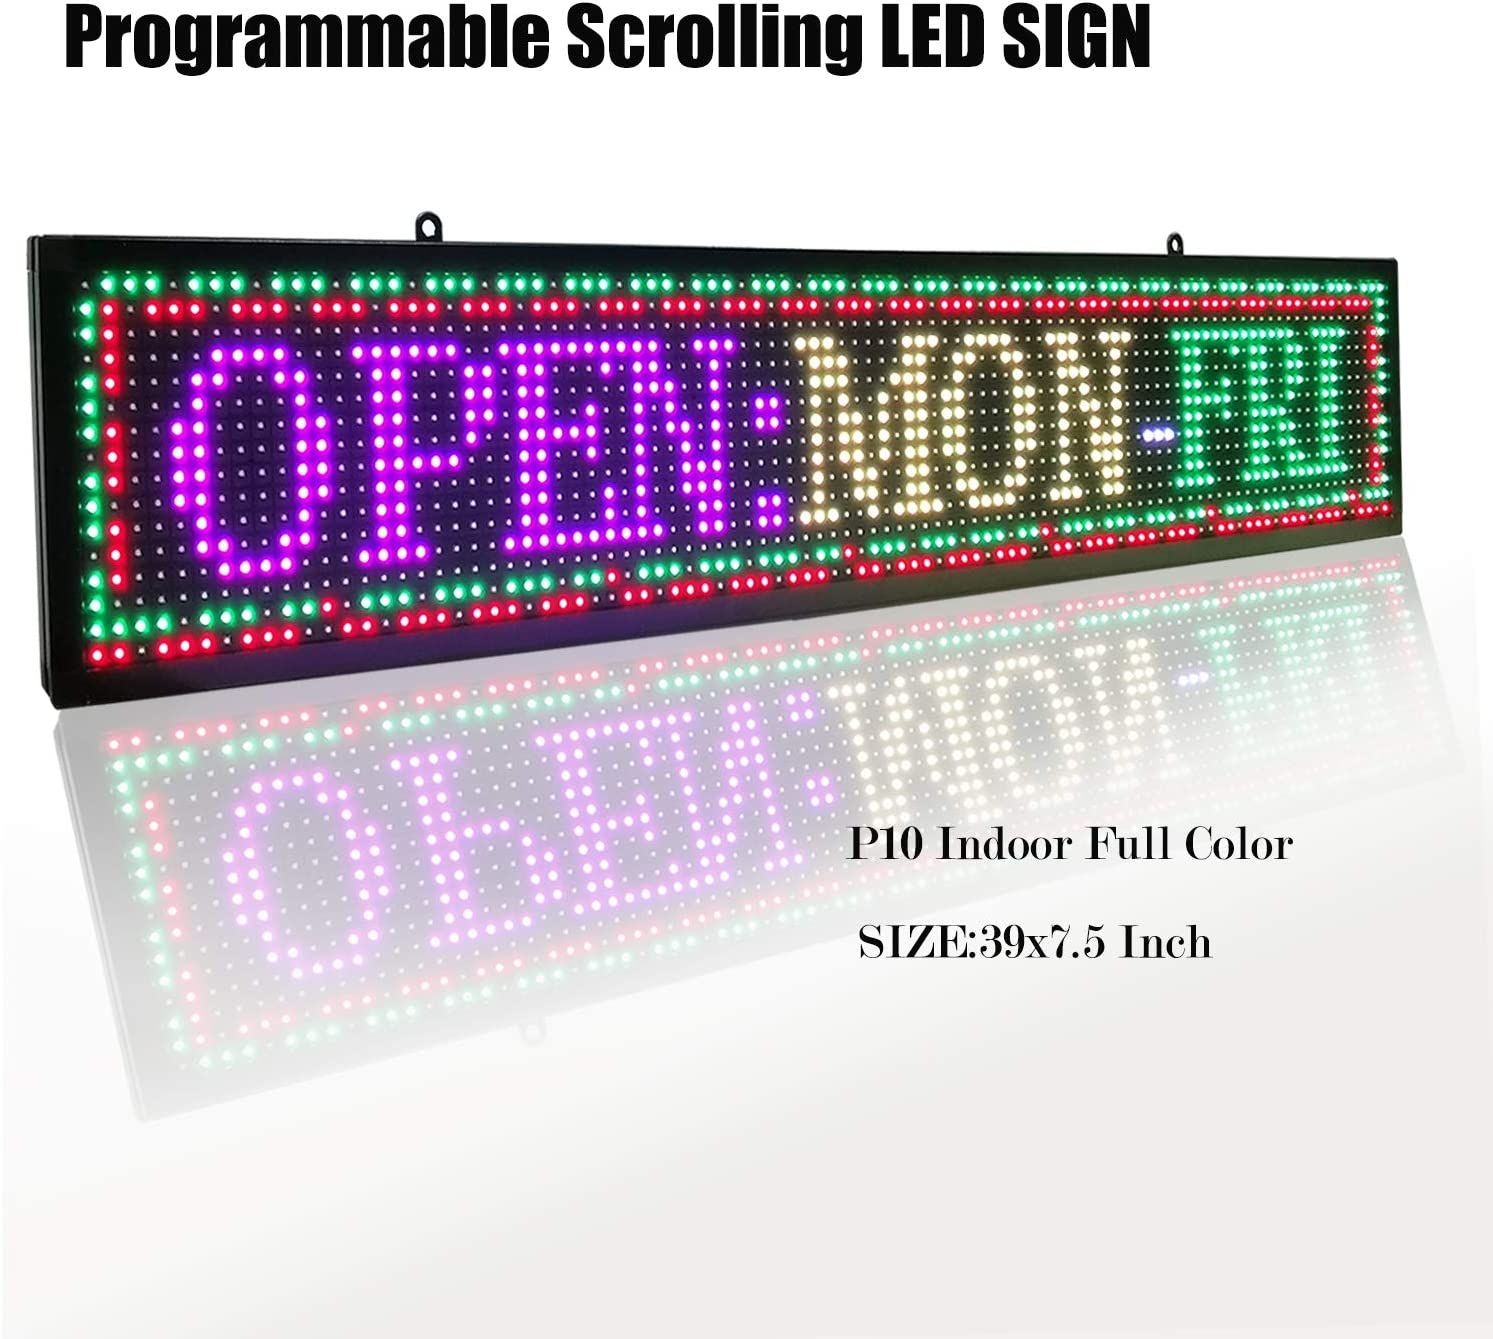 Programmable LED Sign P10 Indoor LED Display 39 X 7.5 Full Color  Programmable